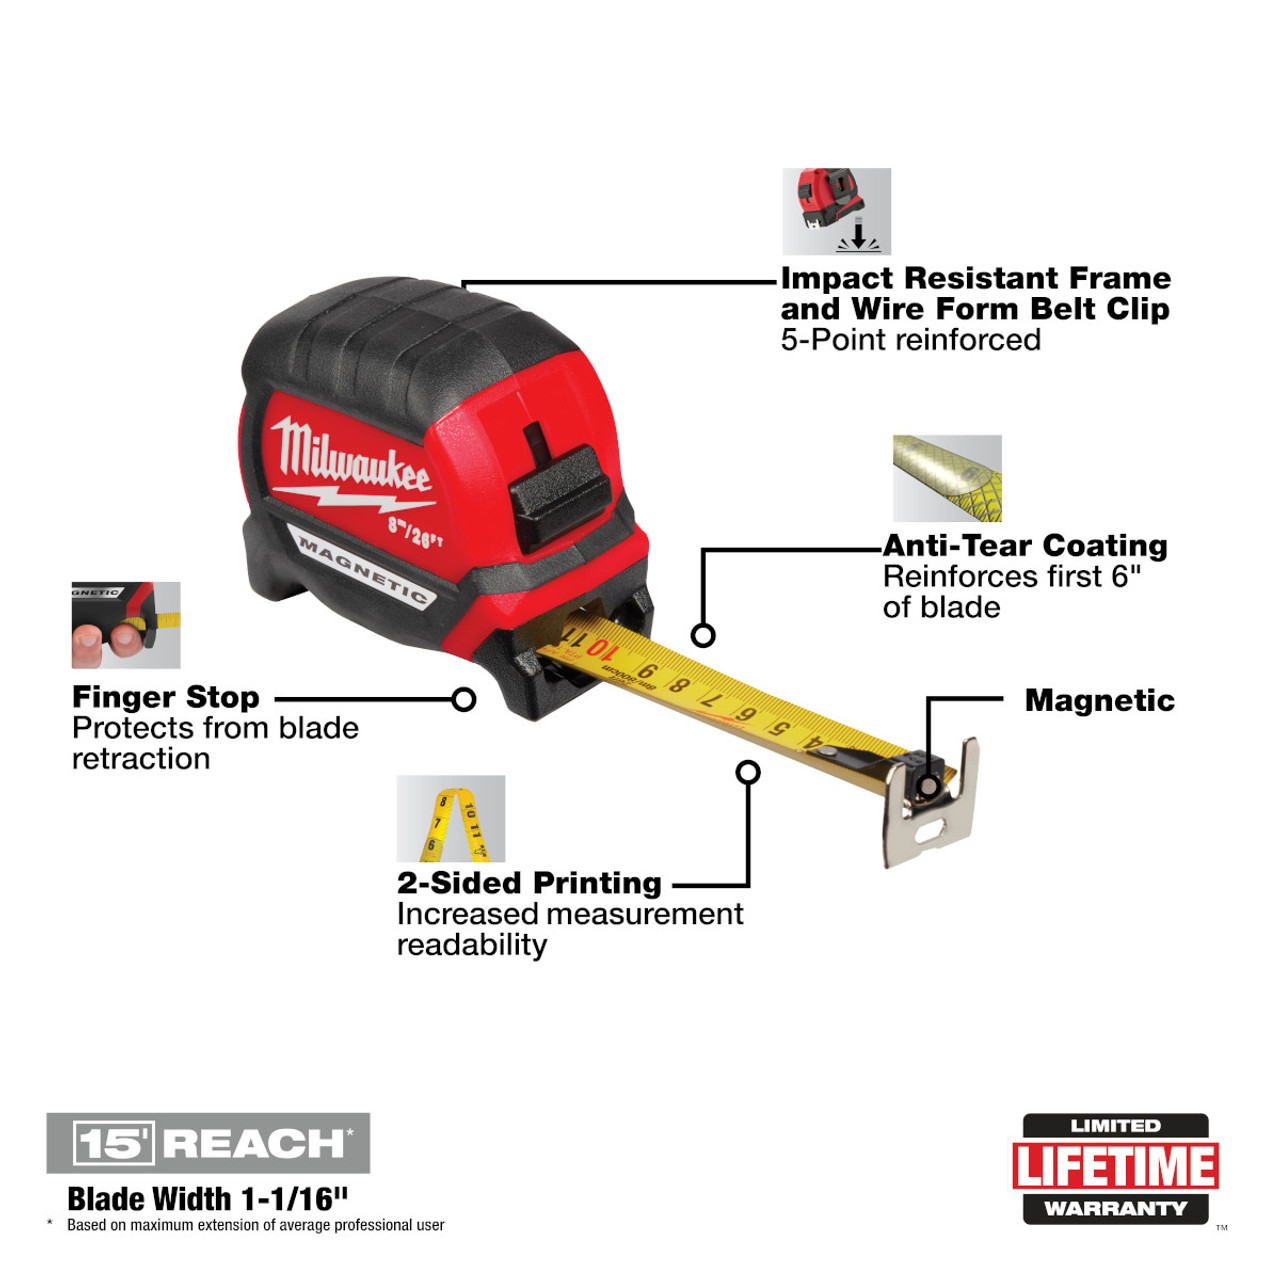 Milwaukee 8m/26 ft. Magnetic Compact Wide Blade Tape Measure